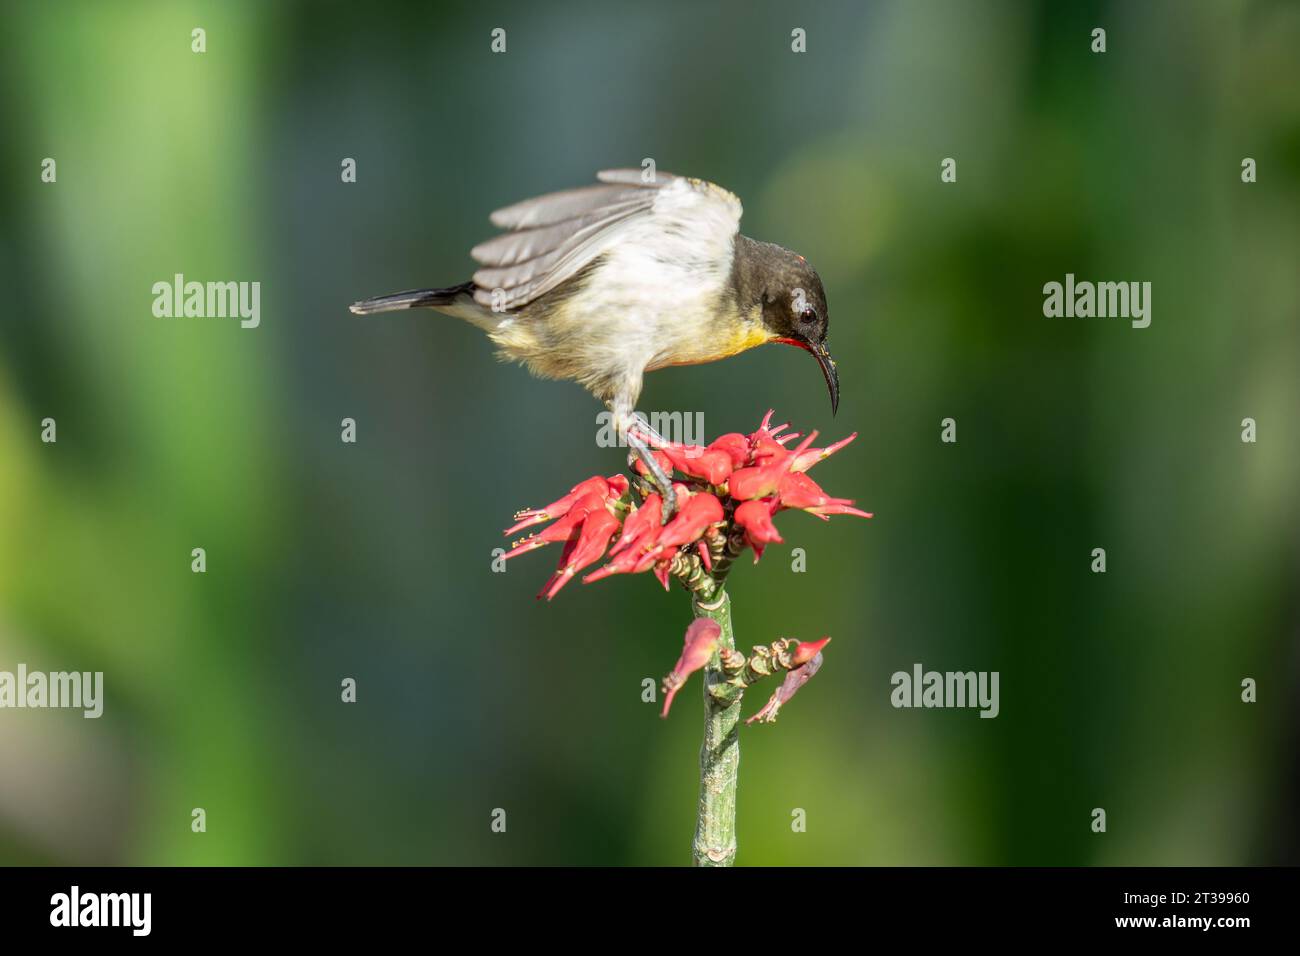 Orange breasted honeyreater with specks of pollen on beak landing on red flower wings still in motion to feed on small red flower in Fiji. Stock Photo